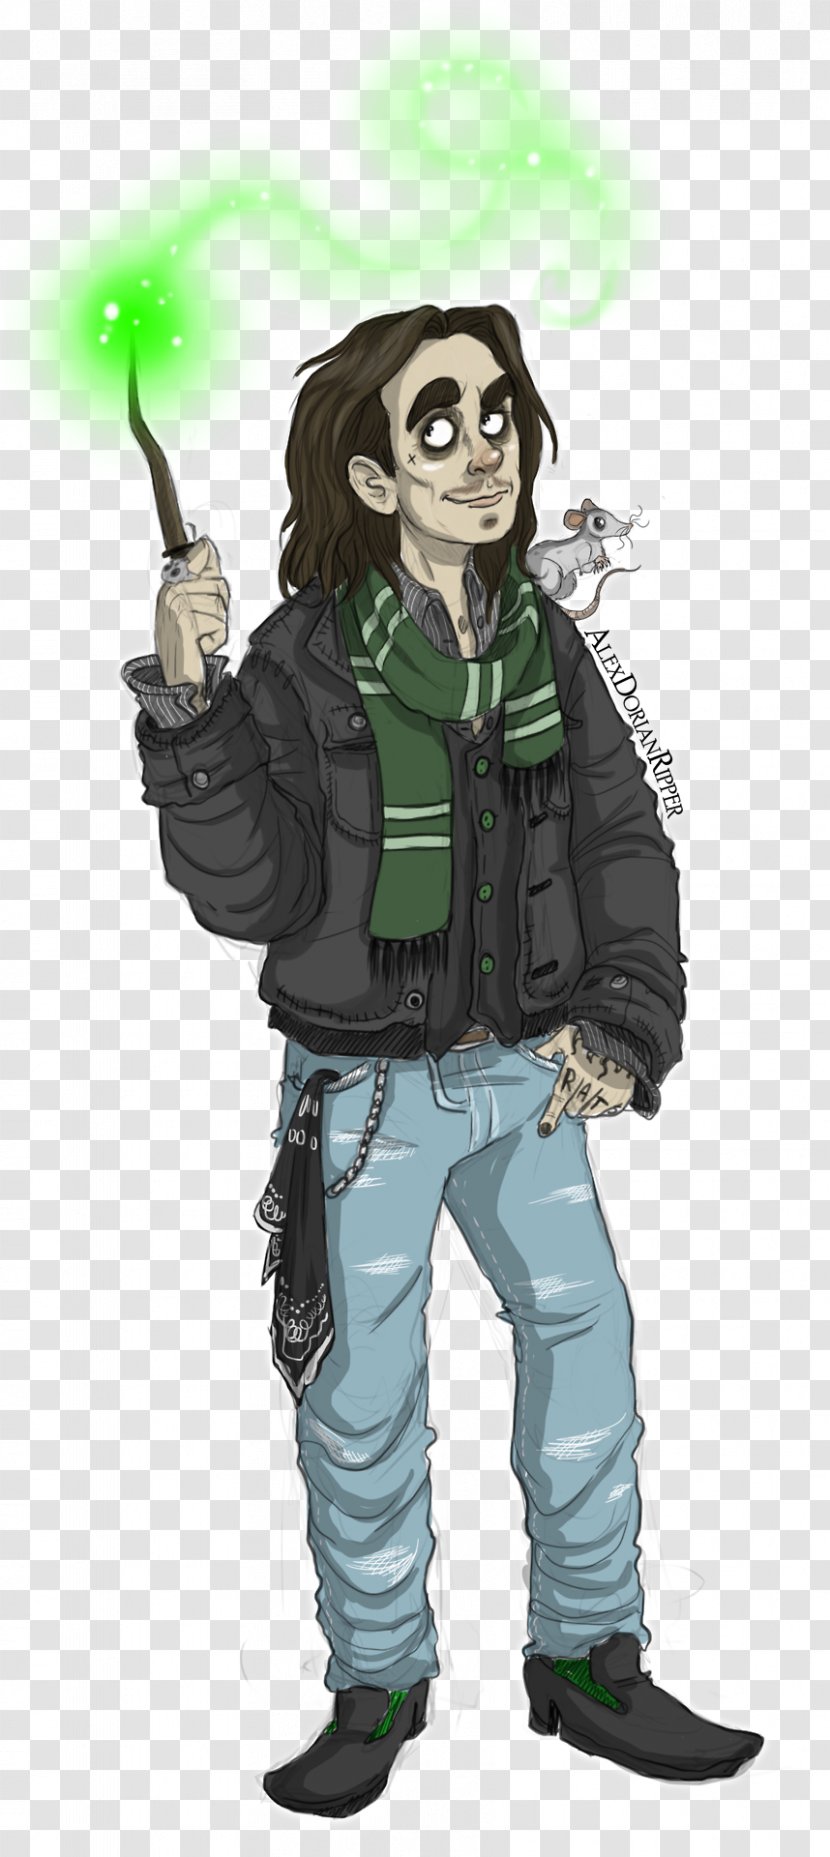 Professor Severus Snape Harry Potter (Literary Series) Hogwarts School Of Witchcraft And Wizardry - Fan Art Transparent PNG